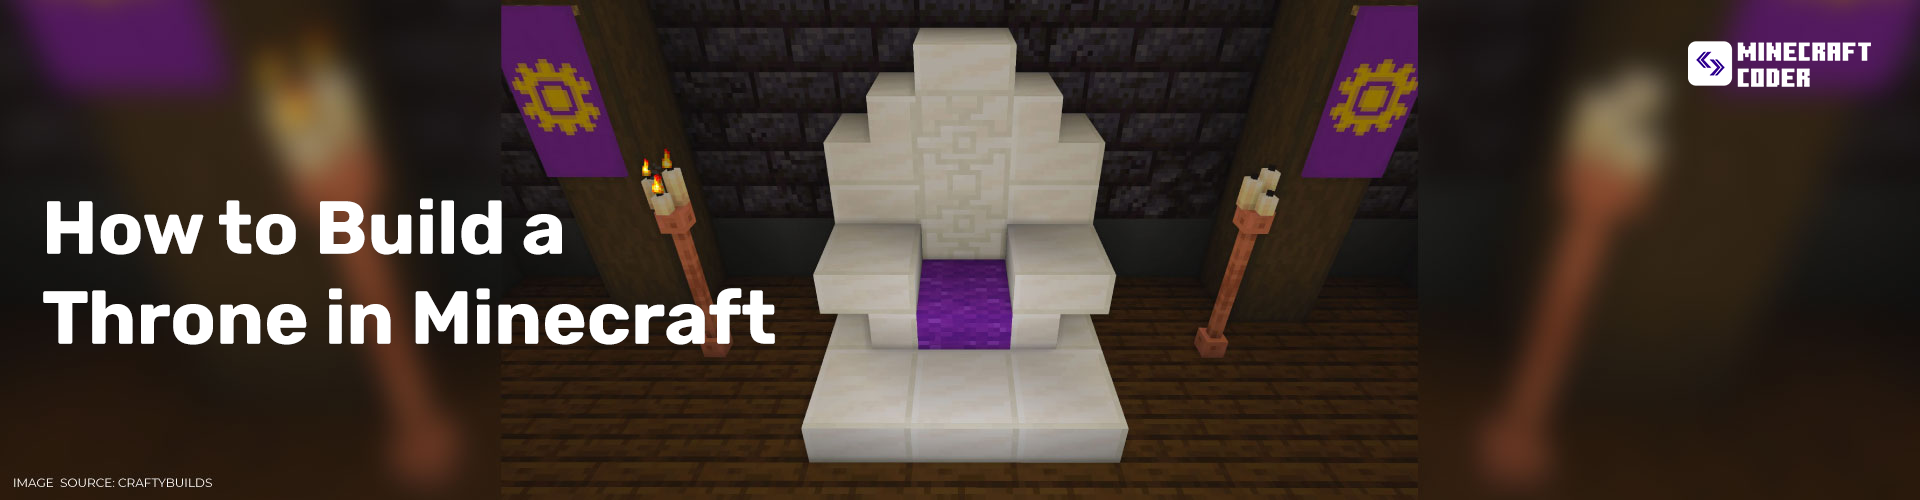 How to Build a Throne in Minecraft